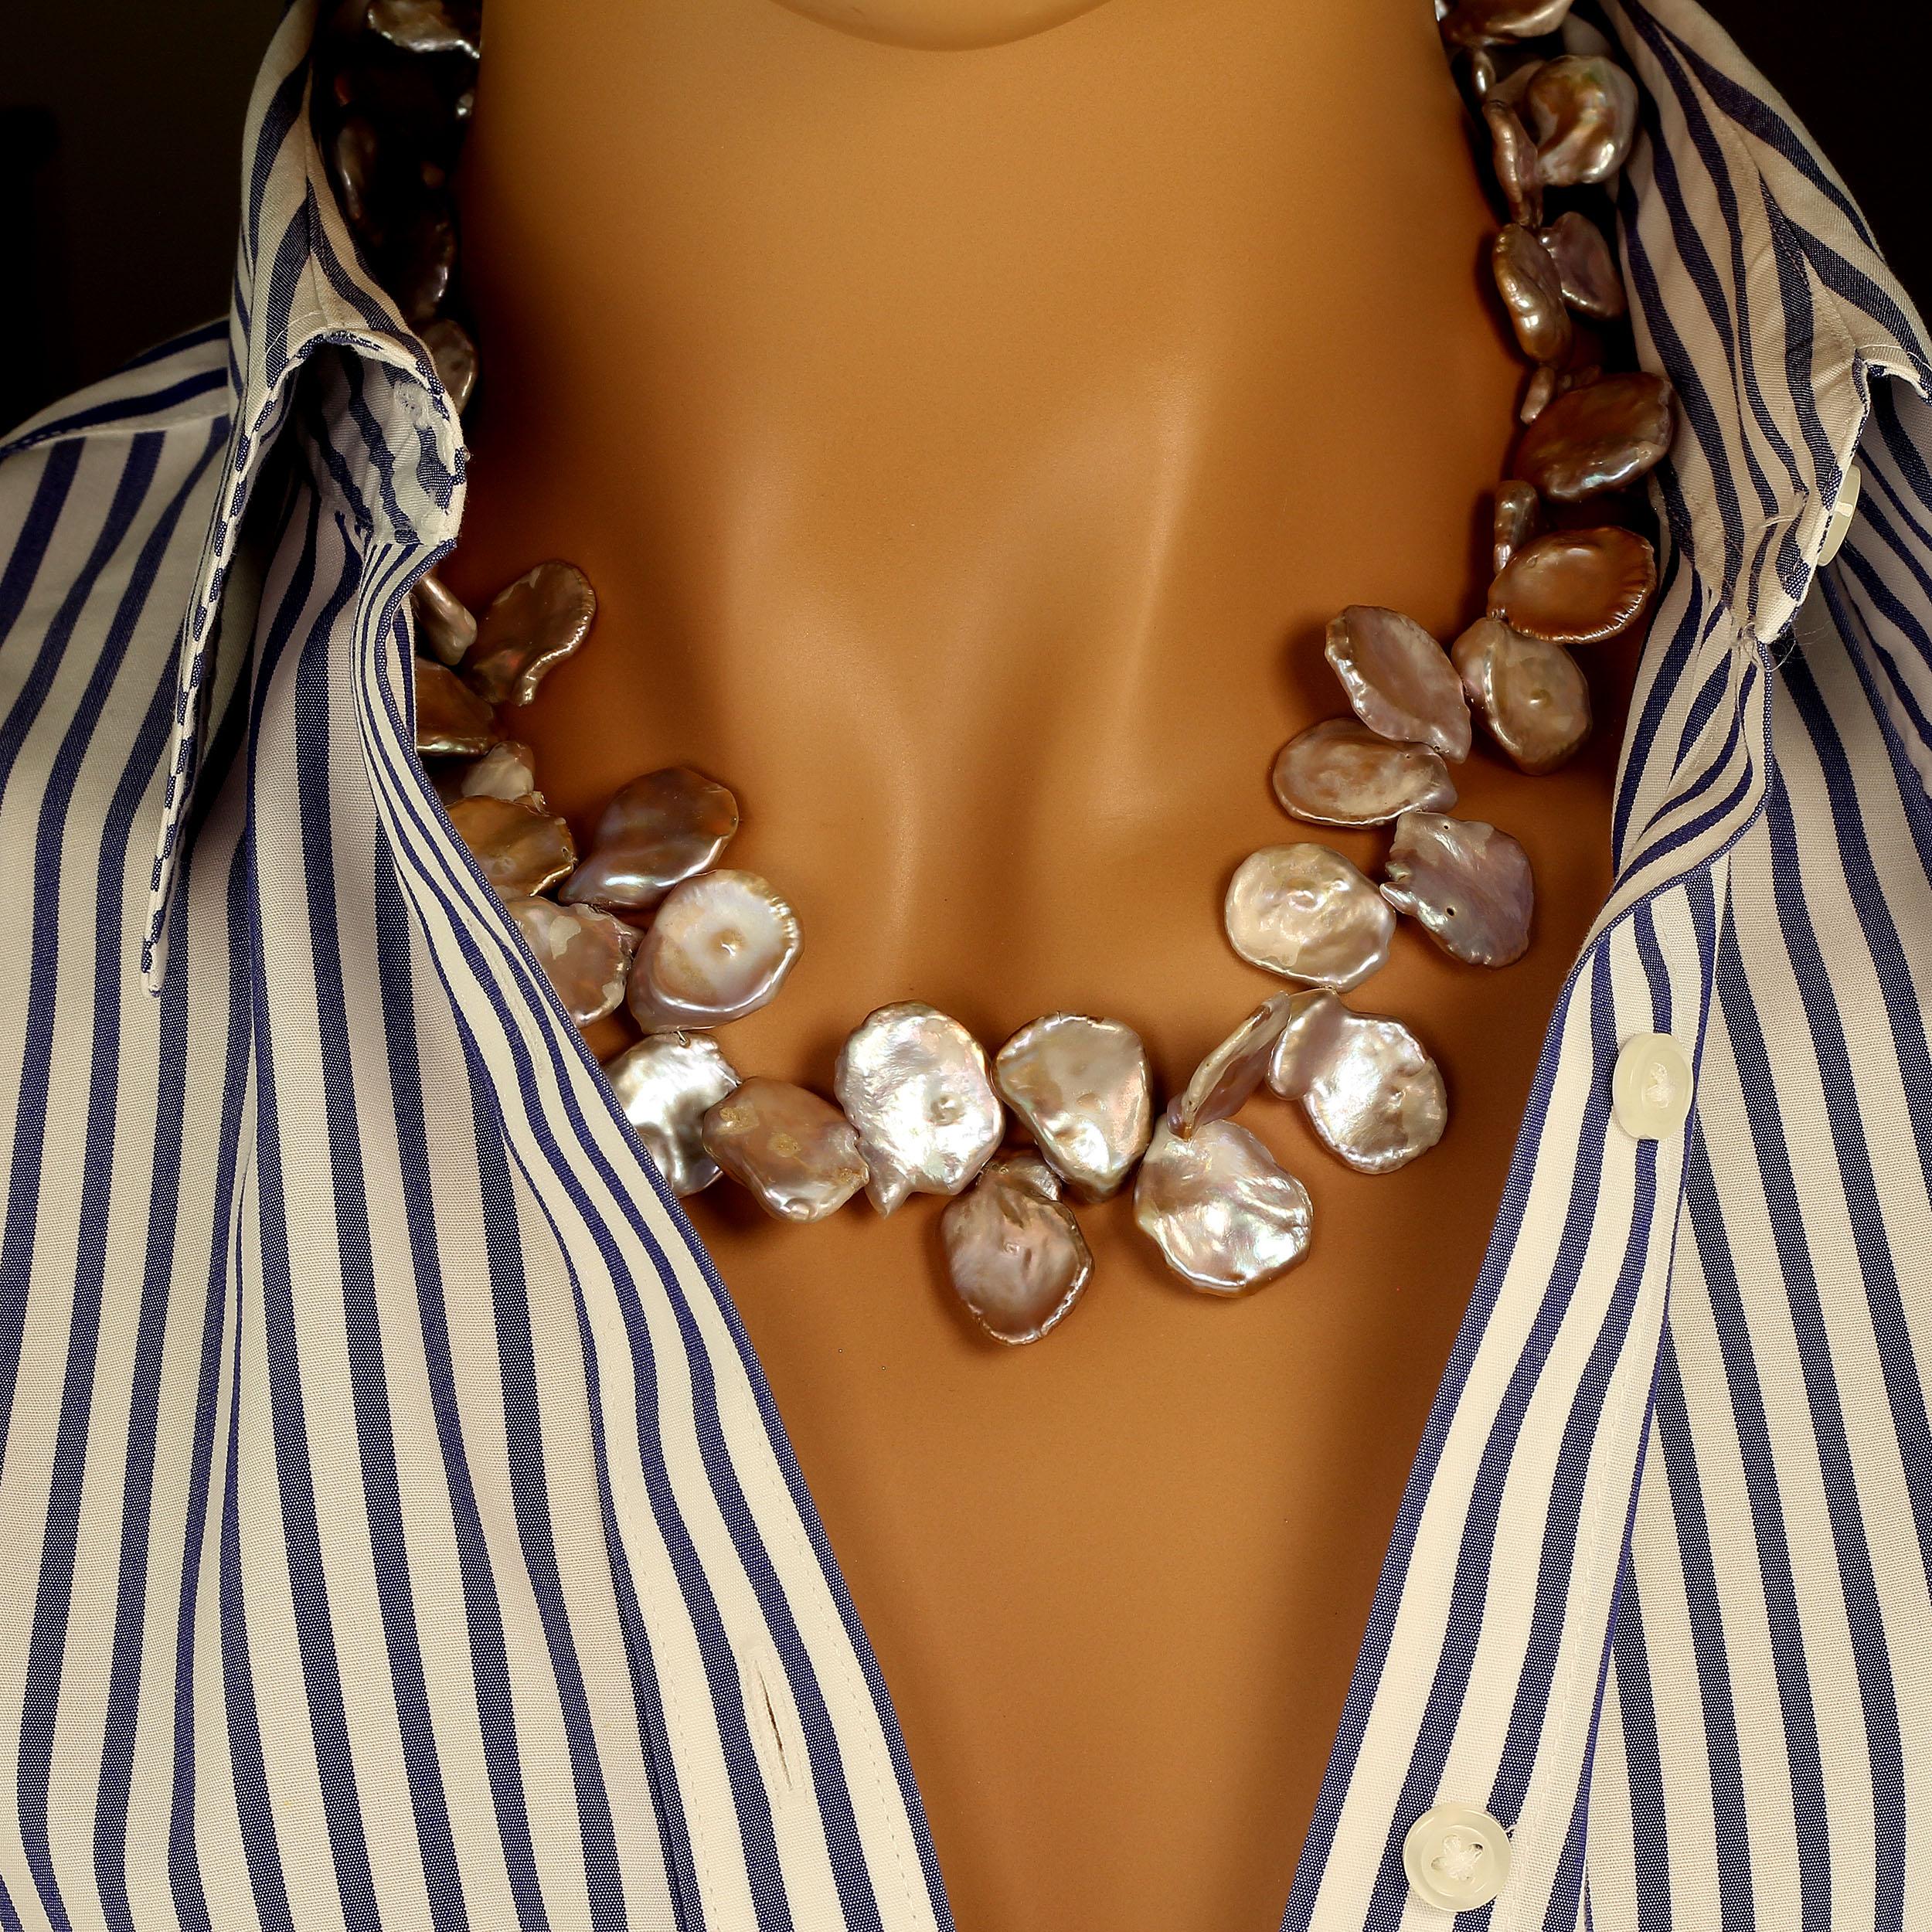 Keep Calm and Wear Pearls

Graduated gray iridescent Keshi Pearl necklace. These lovely Pearls flash shades of pink and blue through their uneven nacre. The pearls are flat, and more or less round ranging from 15 to 20 MM in diameter. This necklace